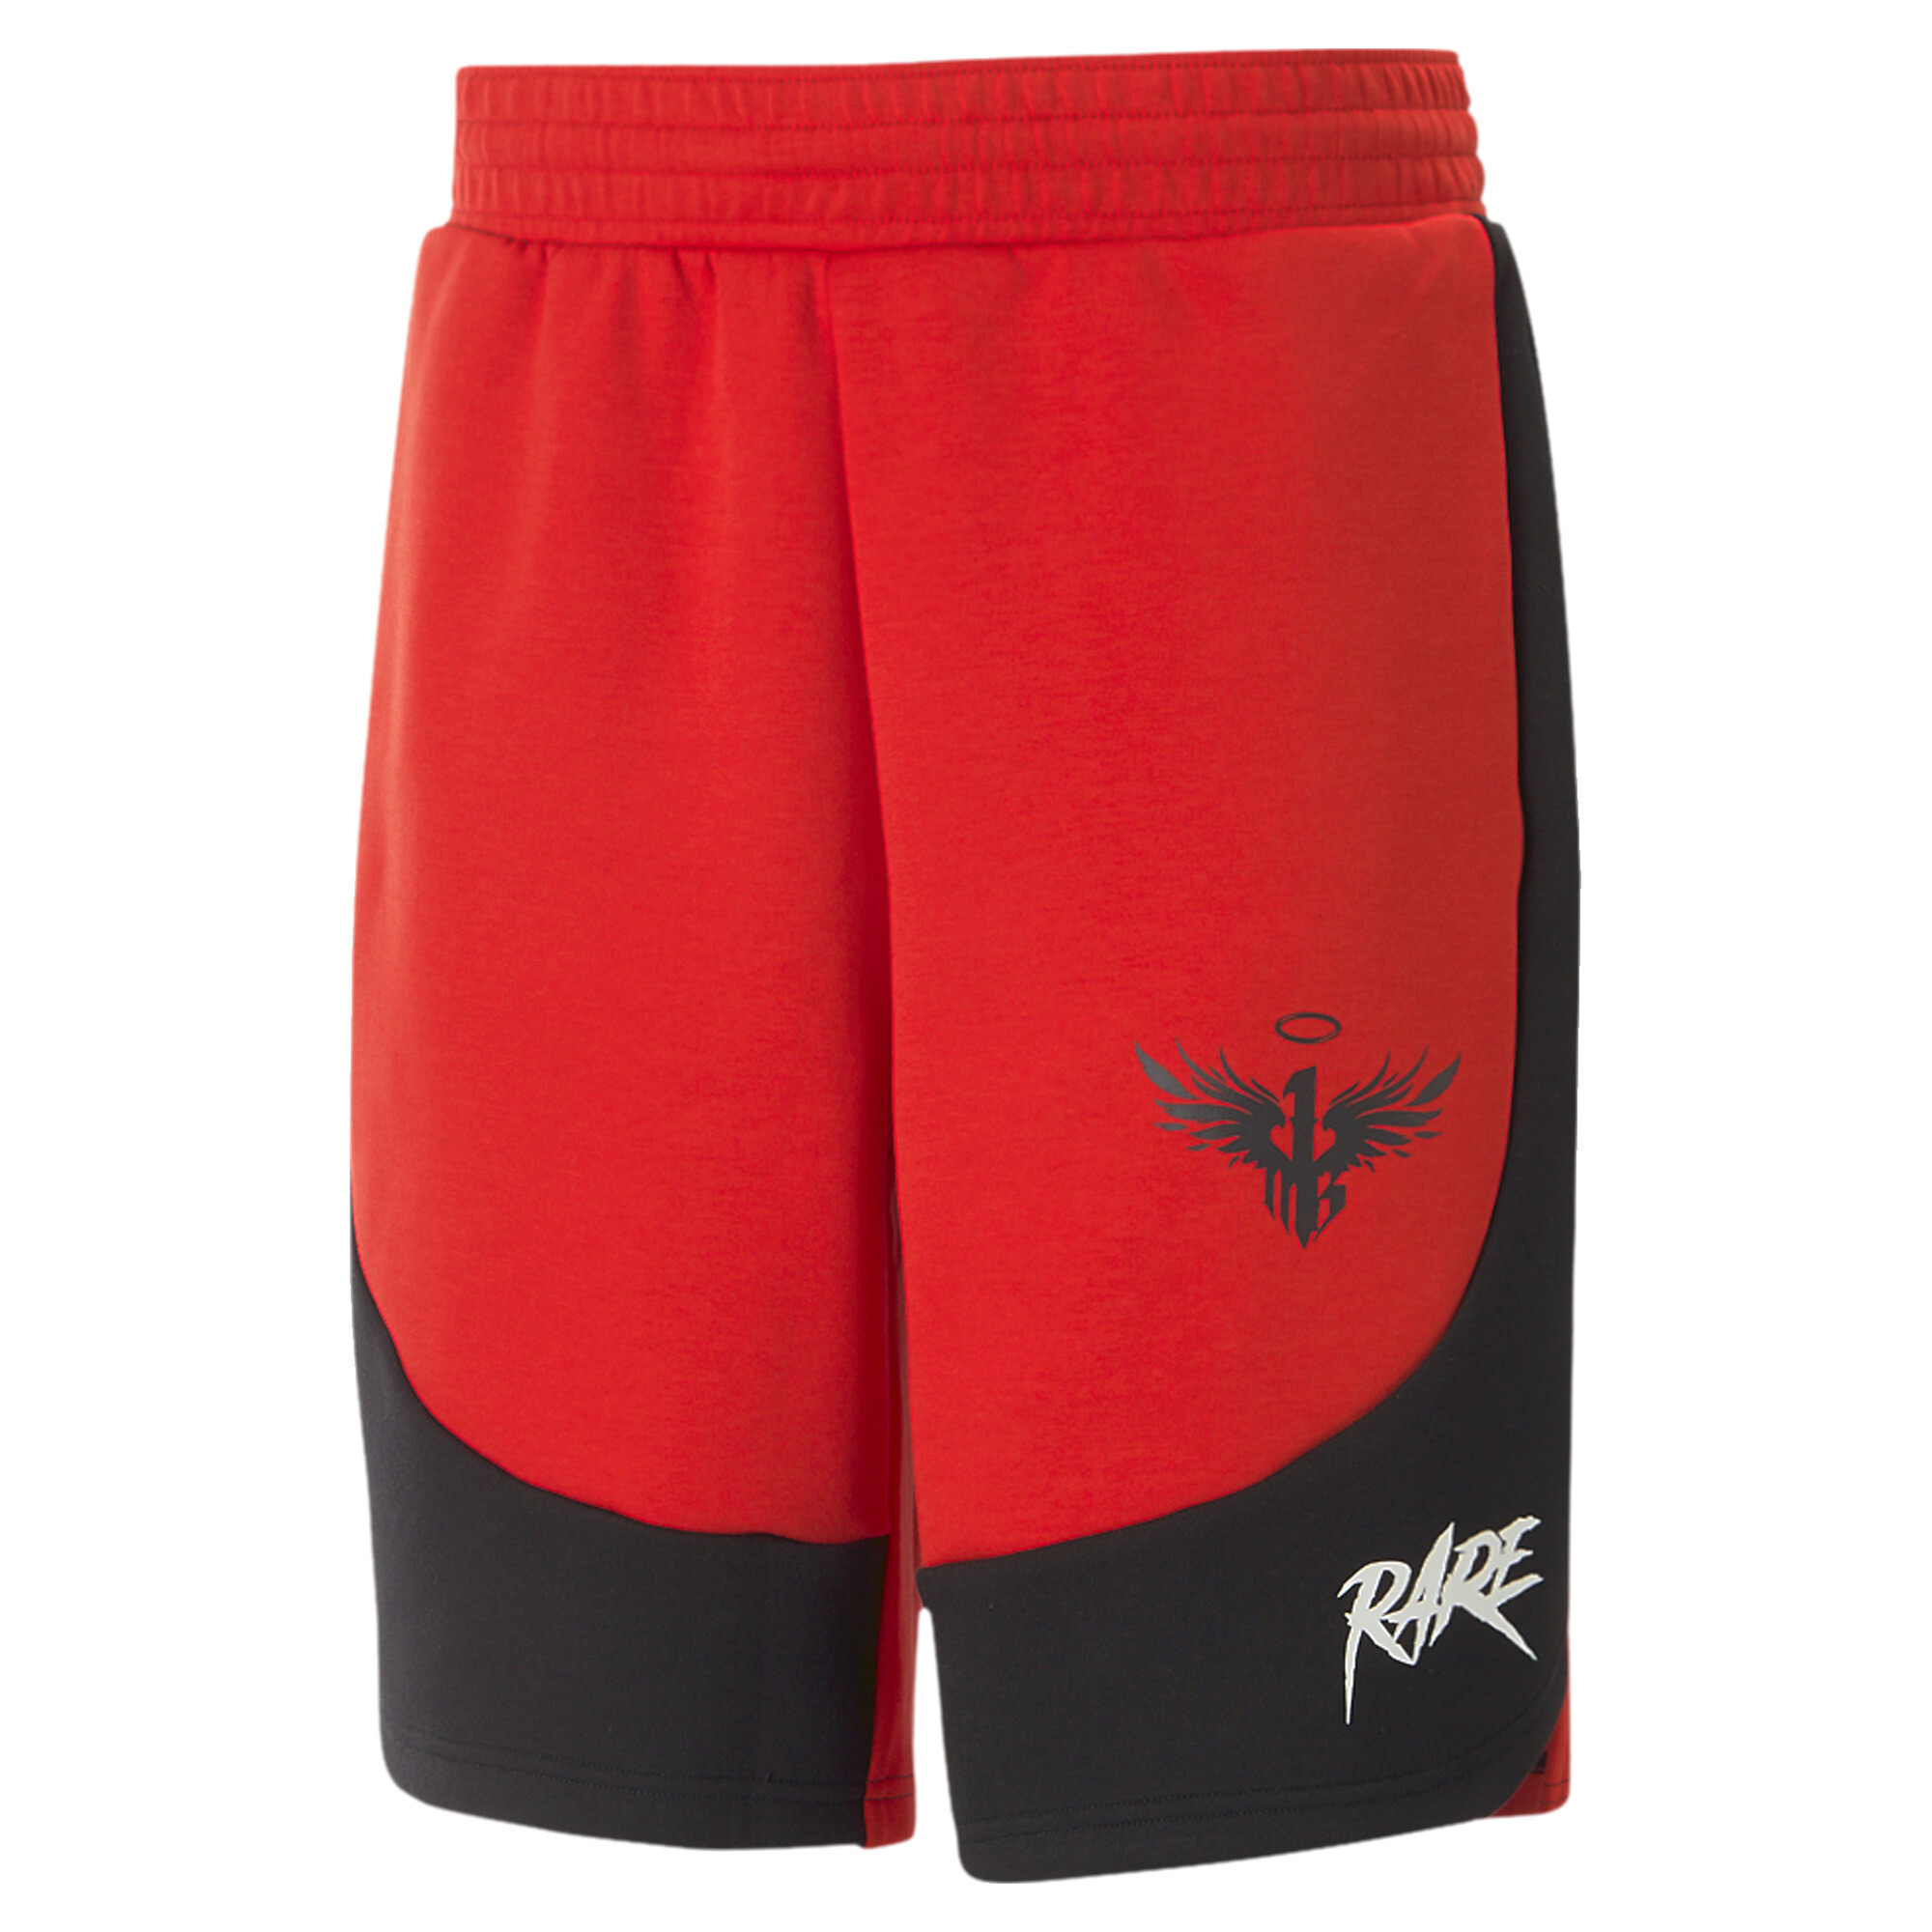 Men's PUMA X MELO Dime Shorts In Red, Size XS